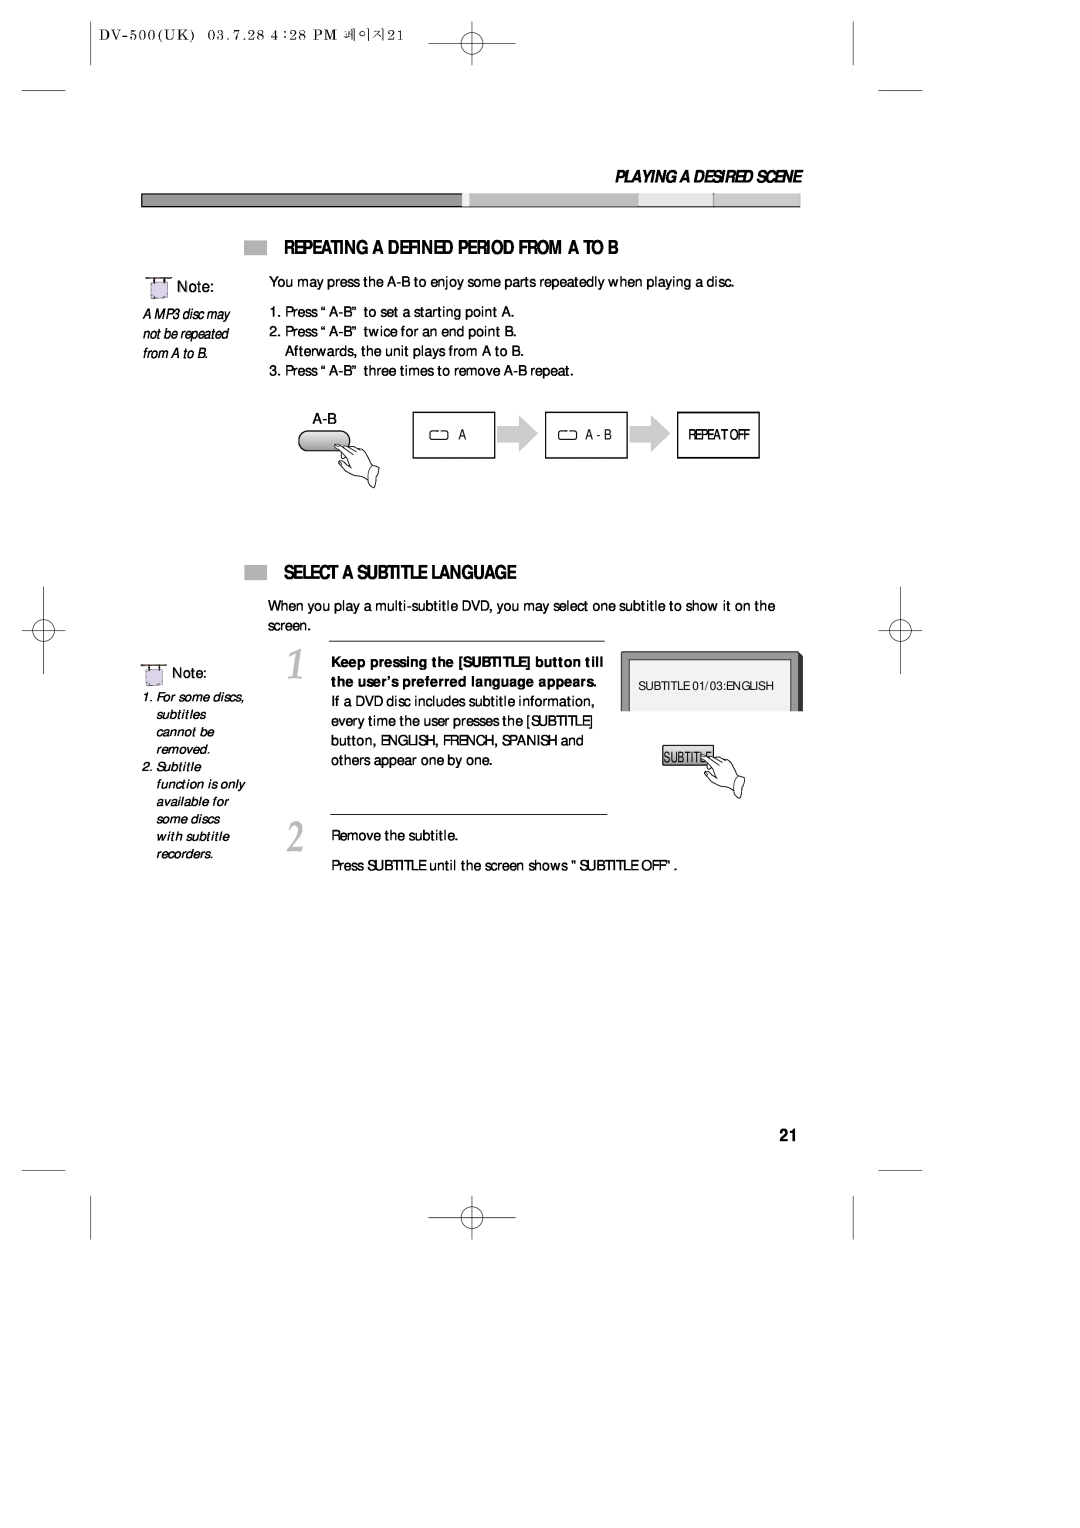 Daewoo DV-500 owner manual Repeating A Defined Period From A To B, Select A Subtitle Language, Playing A Desired Scene 